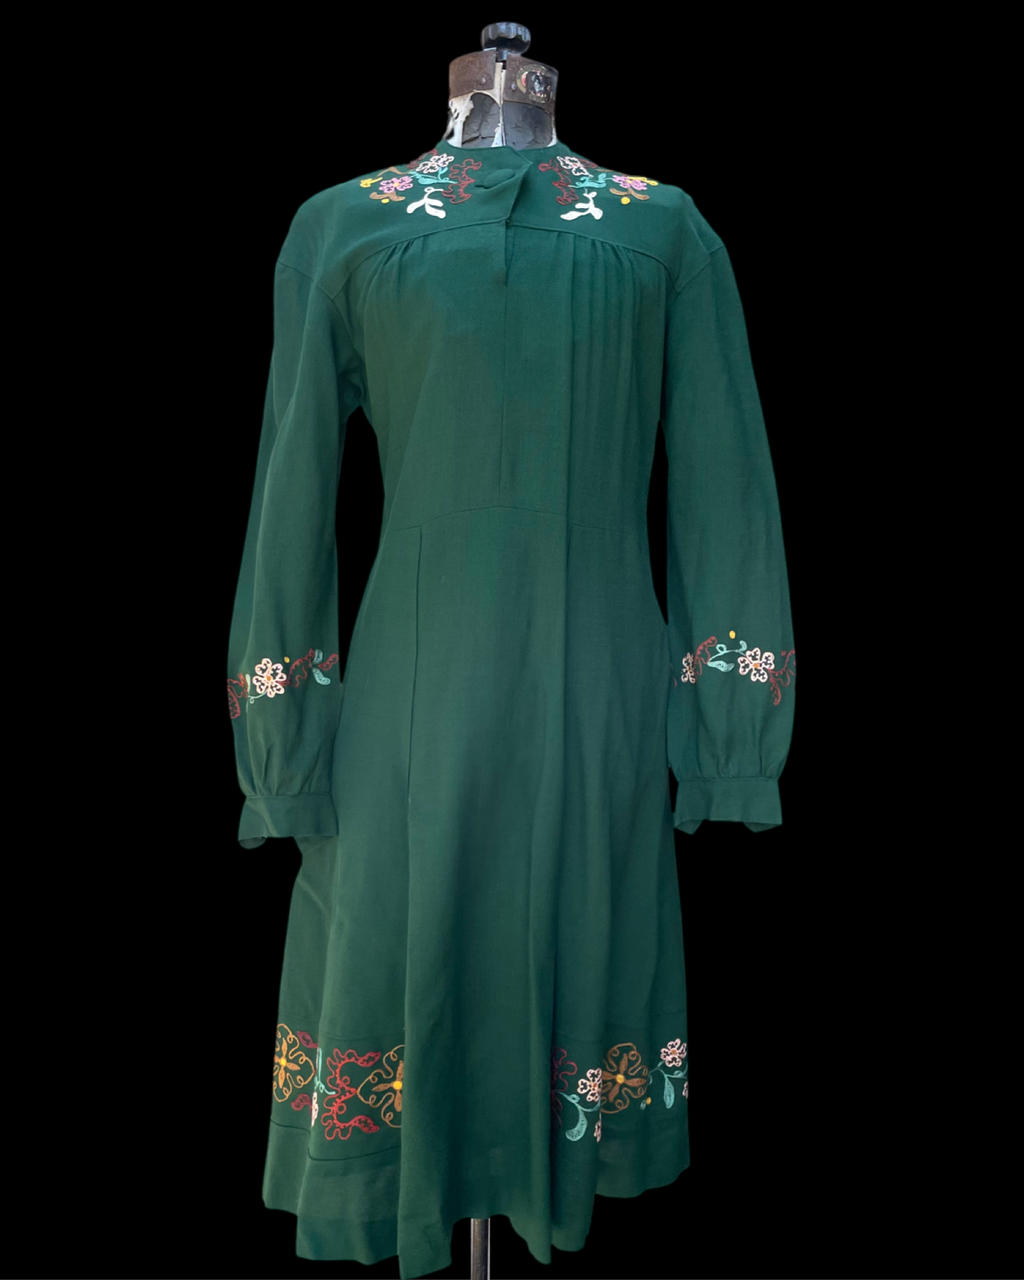 1940s Floral Embroidered Wool Folk Dress